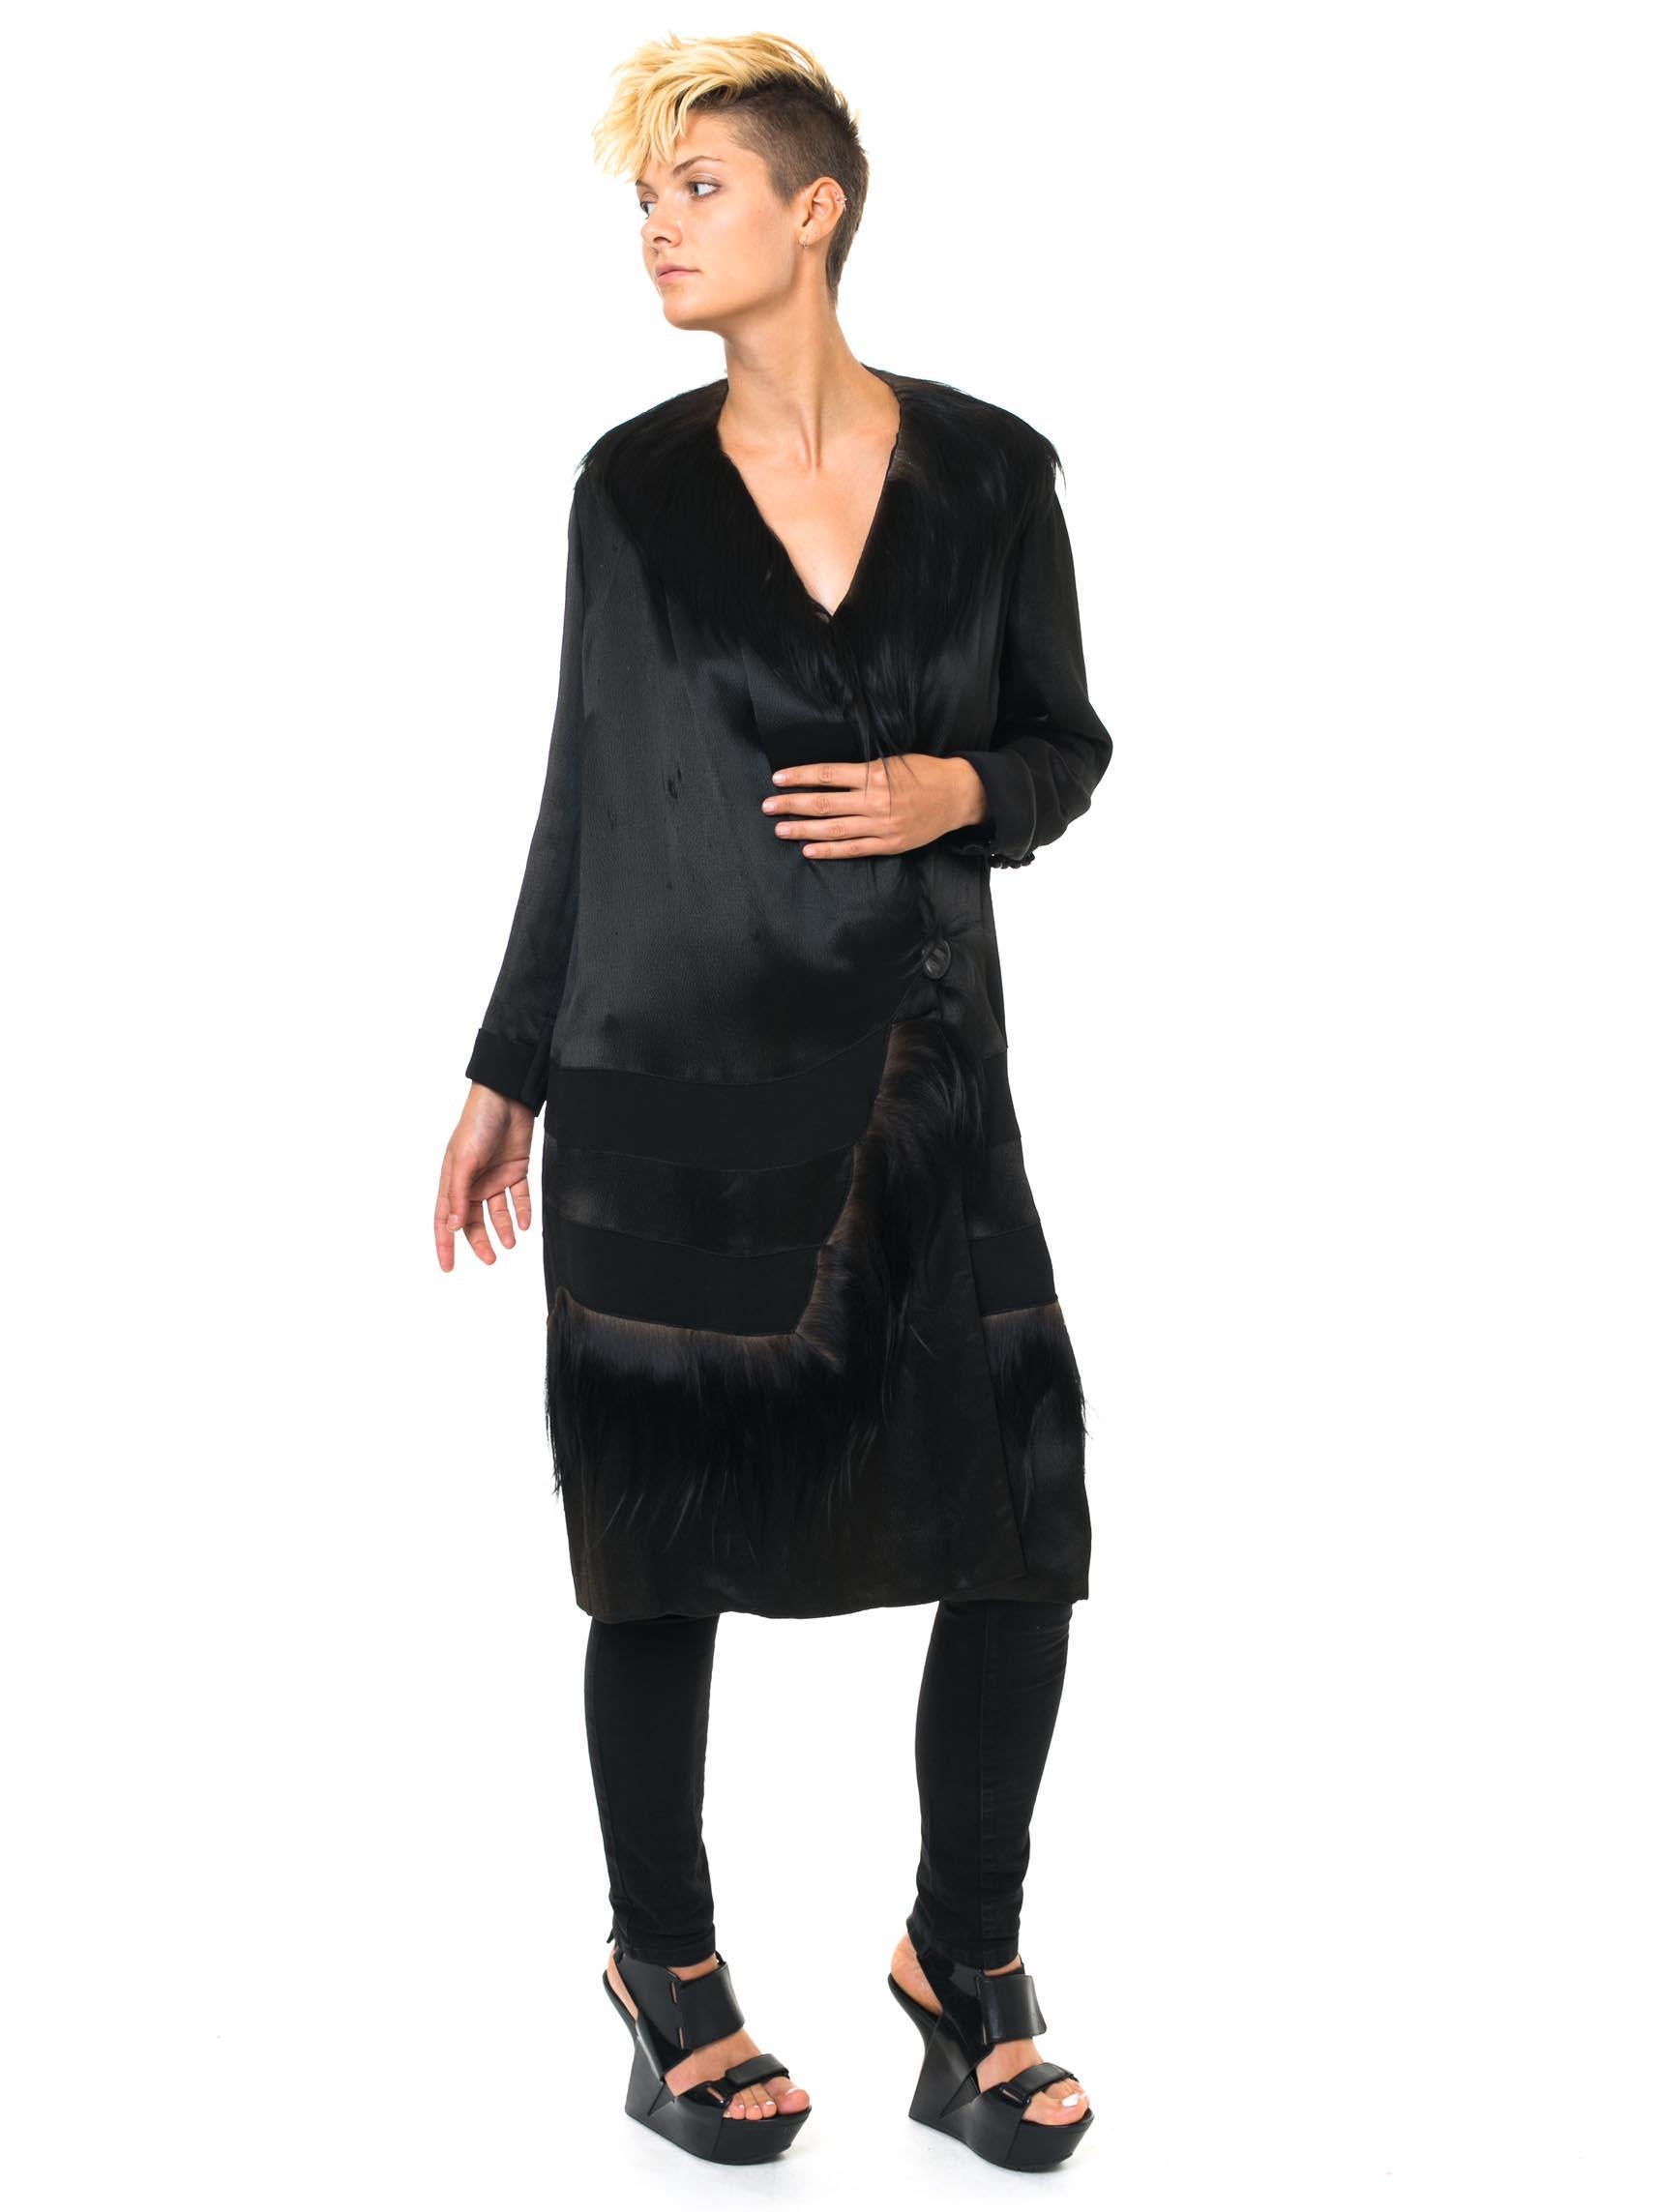 1920S Black Silk Satin  Coat Trimmed In Shaggy Fur For Sale 4